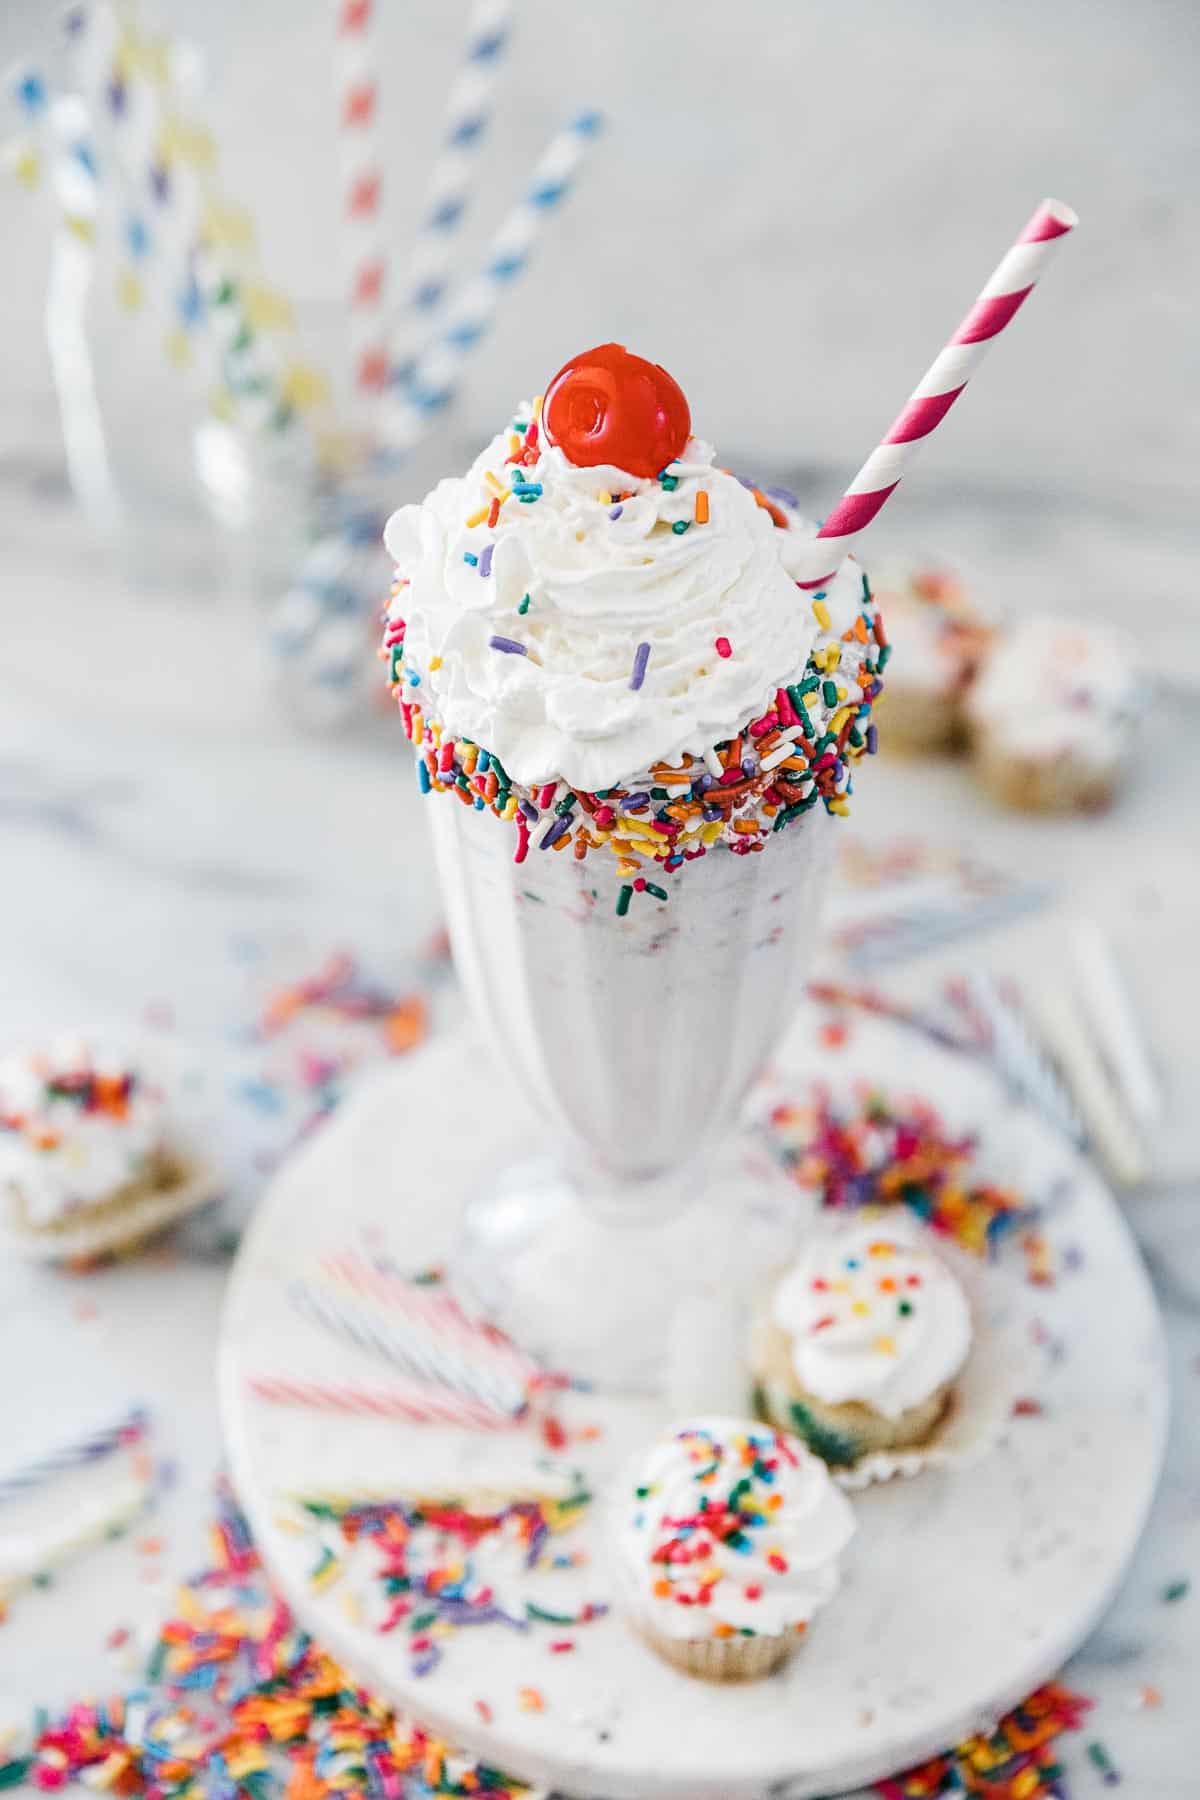 Cake shake in a Sunday glass topped with whipped cream and a cherry.